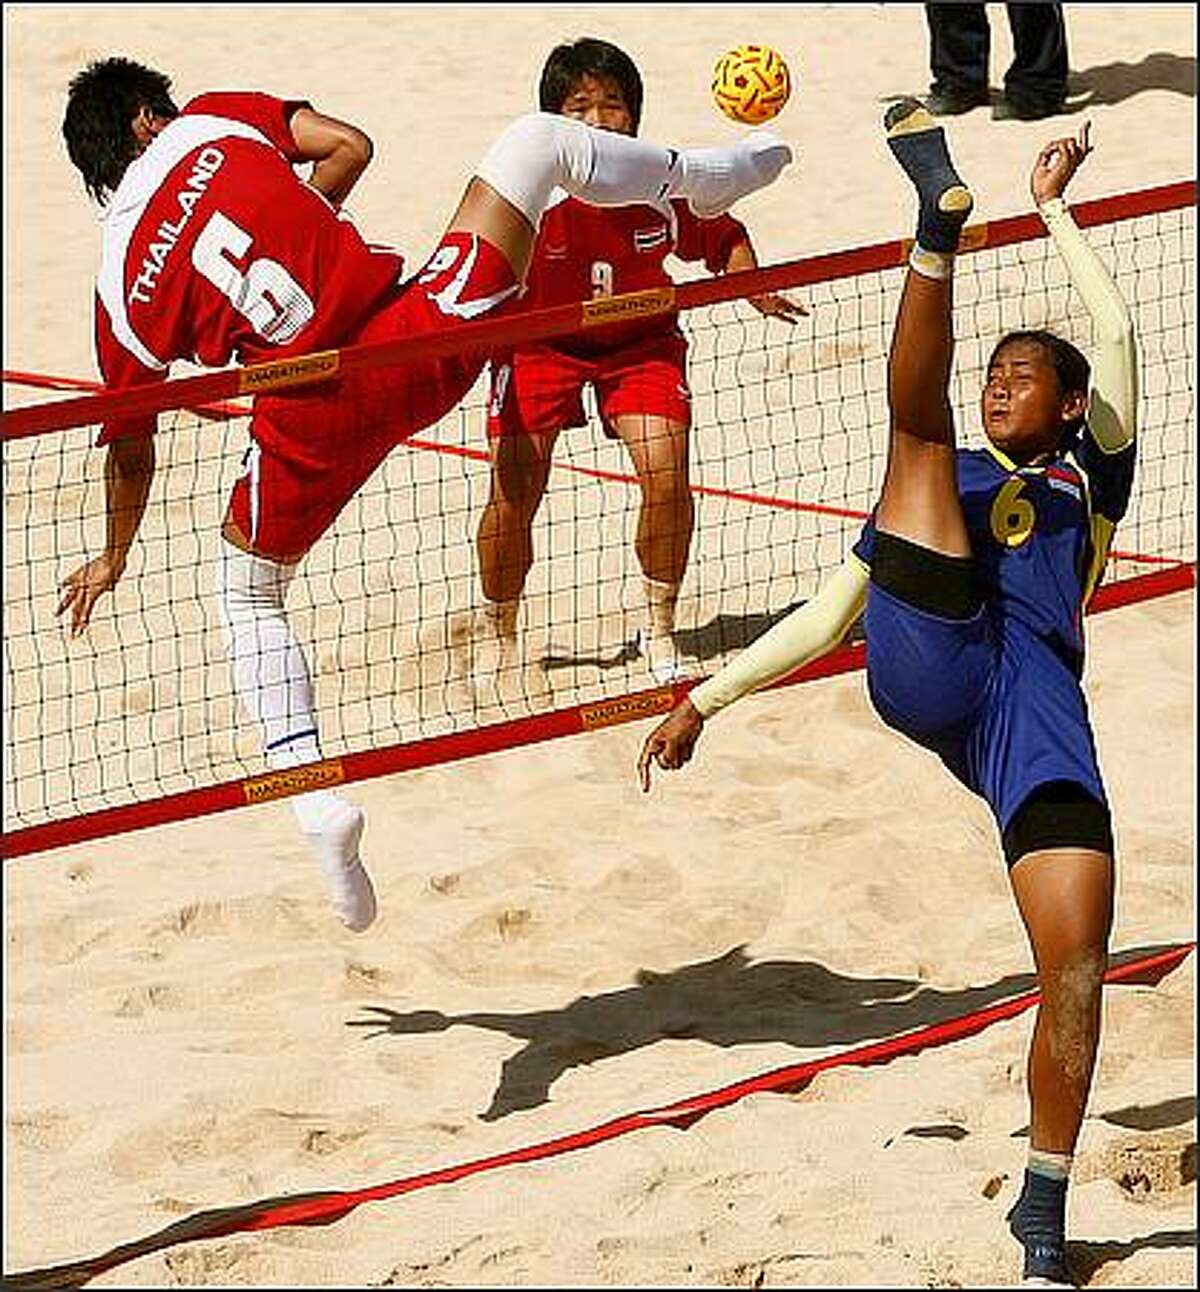 Tidawan Daosakul of Thailand and Lena of Indonesia contest at the net for a ball during the Women's Beach Sepaktakraw gold medal match between Thailand and Indonesia on day four of the 2008 Asian Beach Games at Sanur Beach in Bali, Indonesia. (Photo by Quinn Rooney/Getty Images)